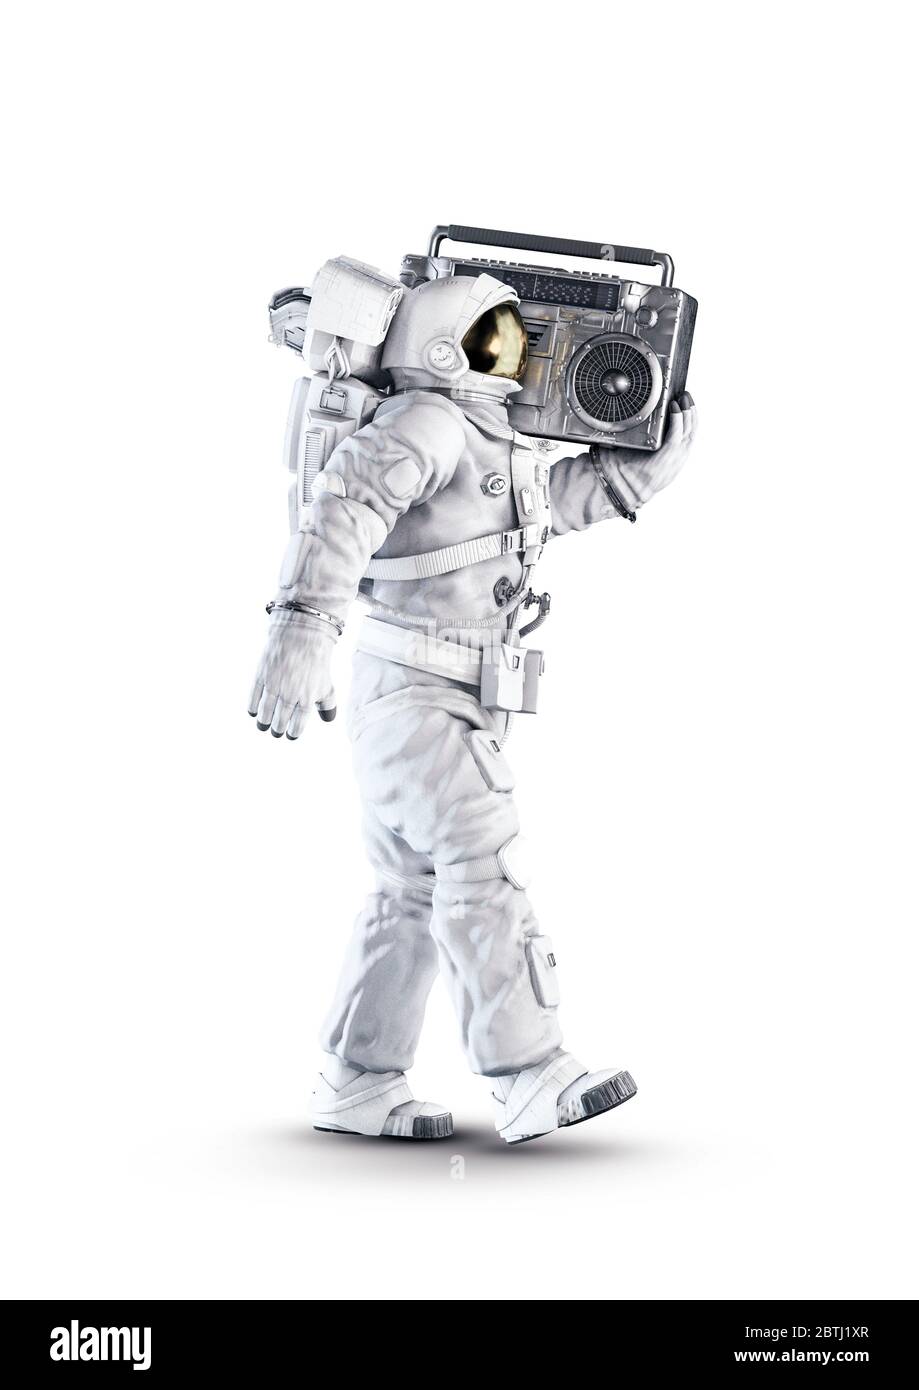 Astronaut with boombox / 3D illustration of space suit wearing male figure carrying retro 80s stereo cassette player isolated on white studio backgrou Stock Photo